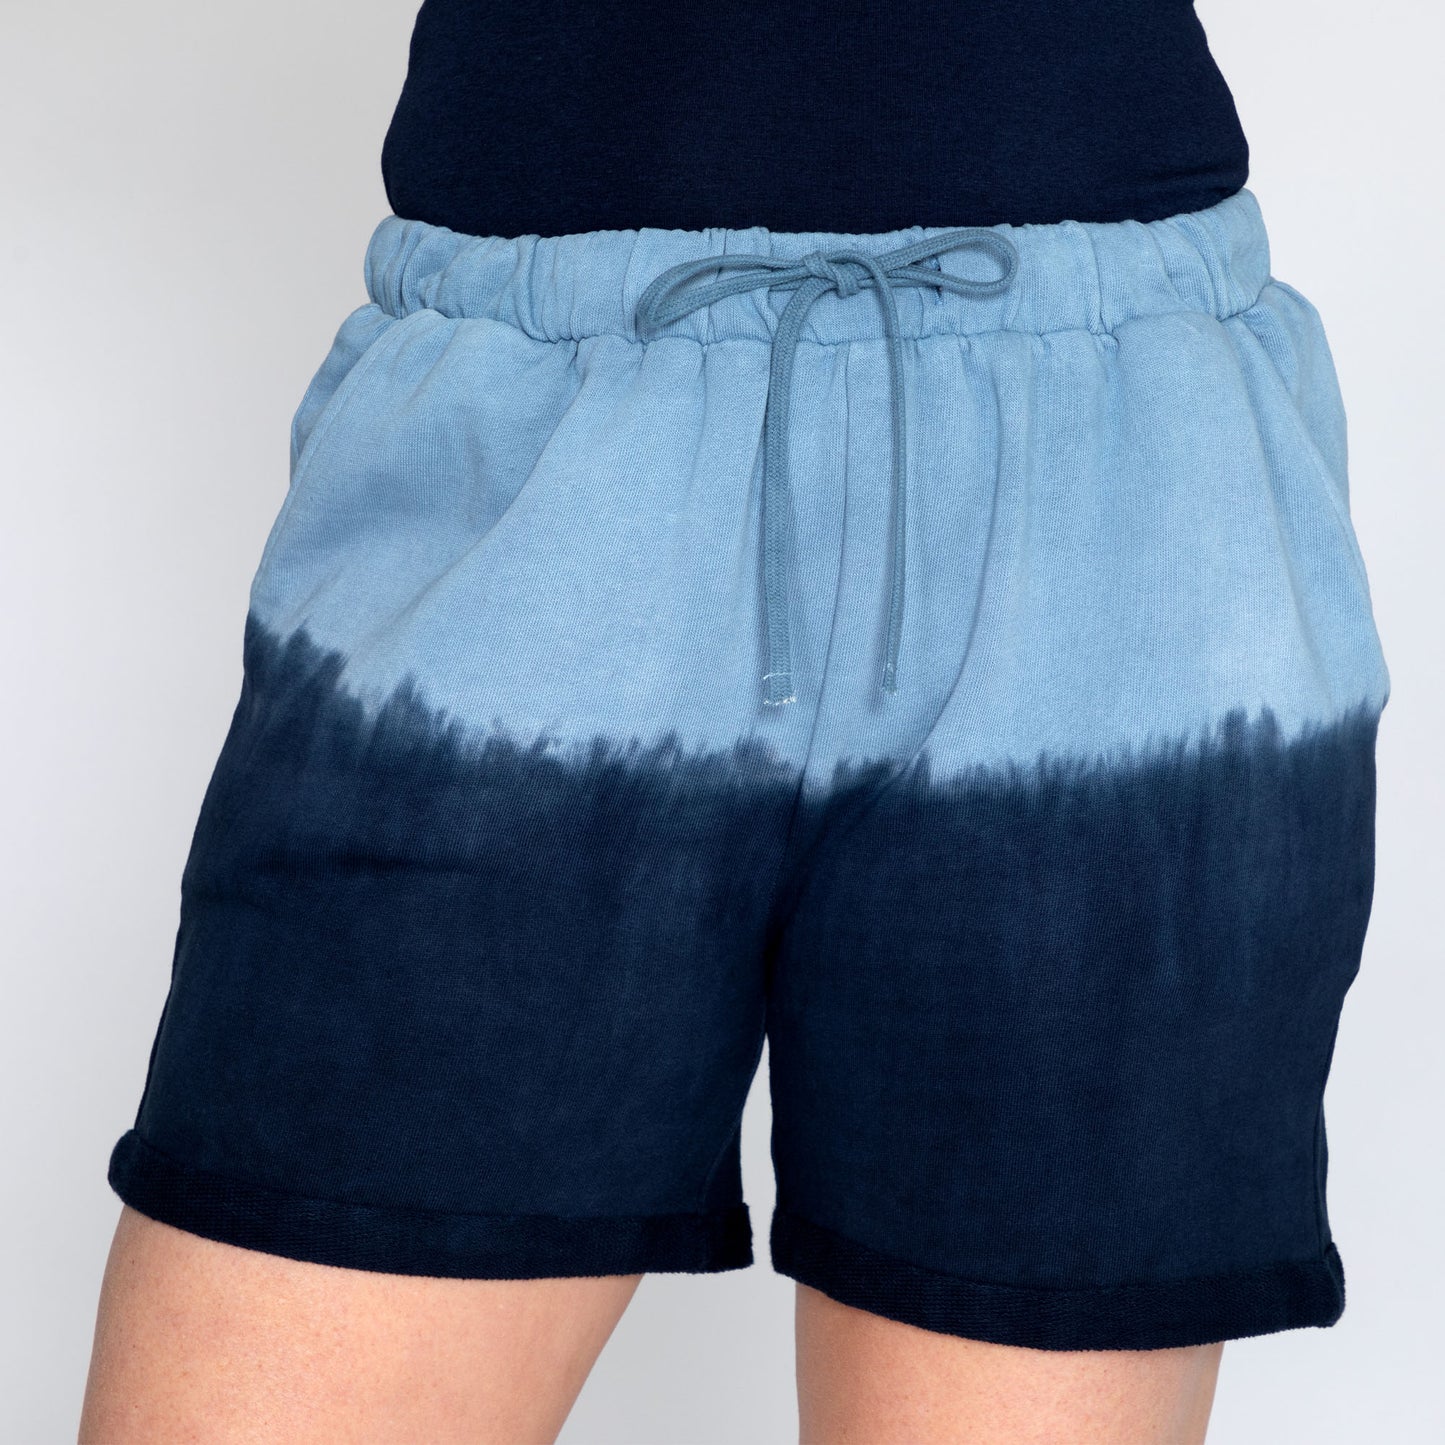 Casual Ombre Shorts